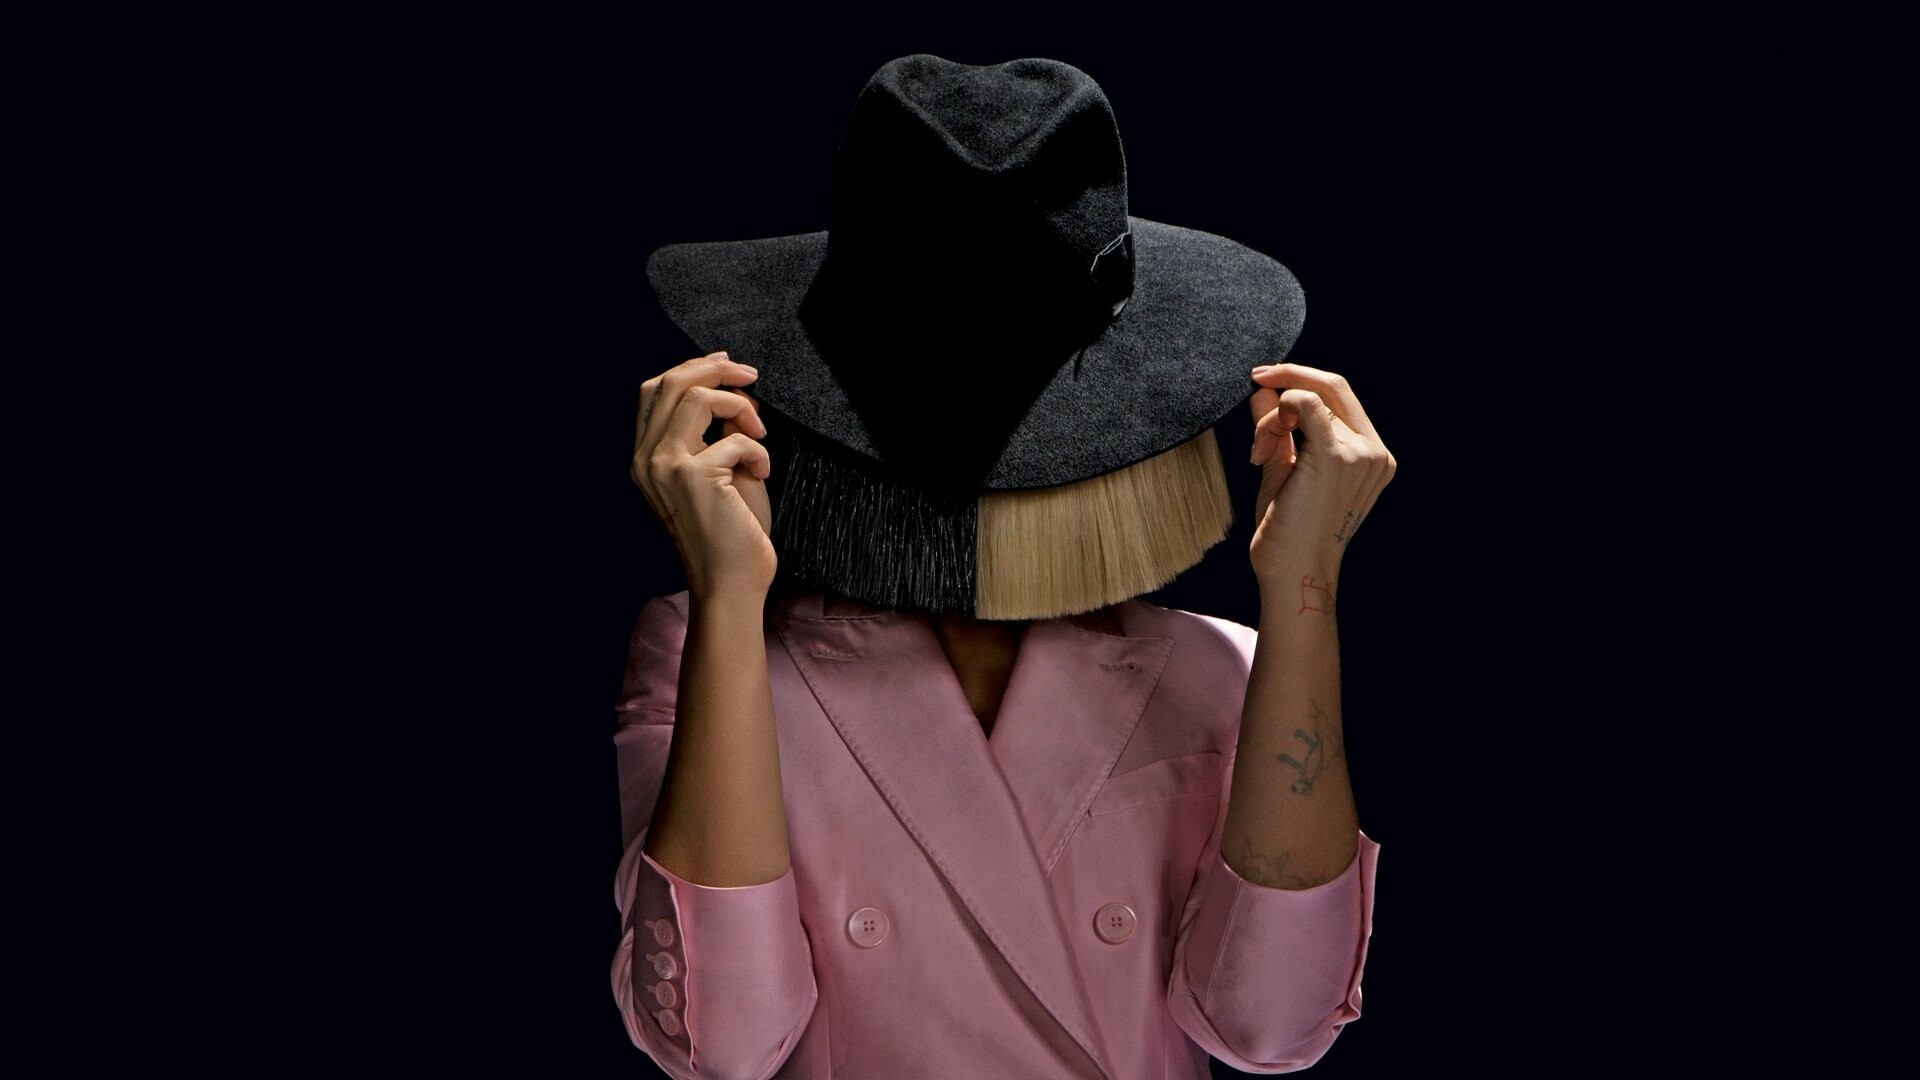 Sia: The third album, Colour the Small One, was released in the United Kingdom on 19 January 2004. 1920x1080 Full HD Background.